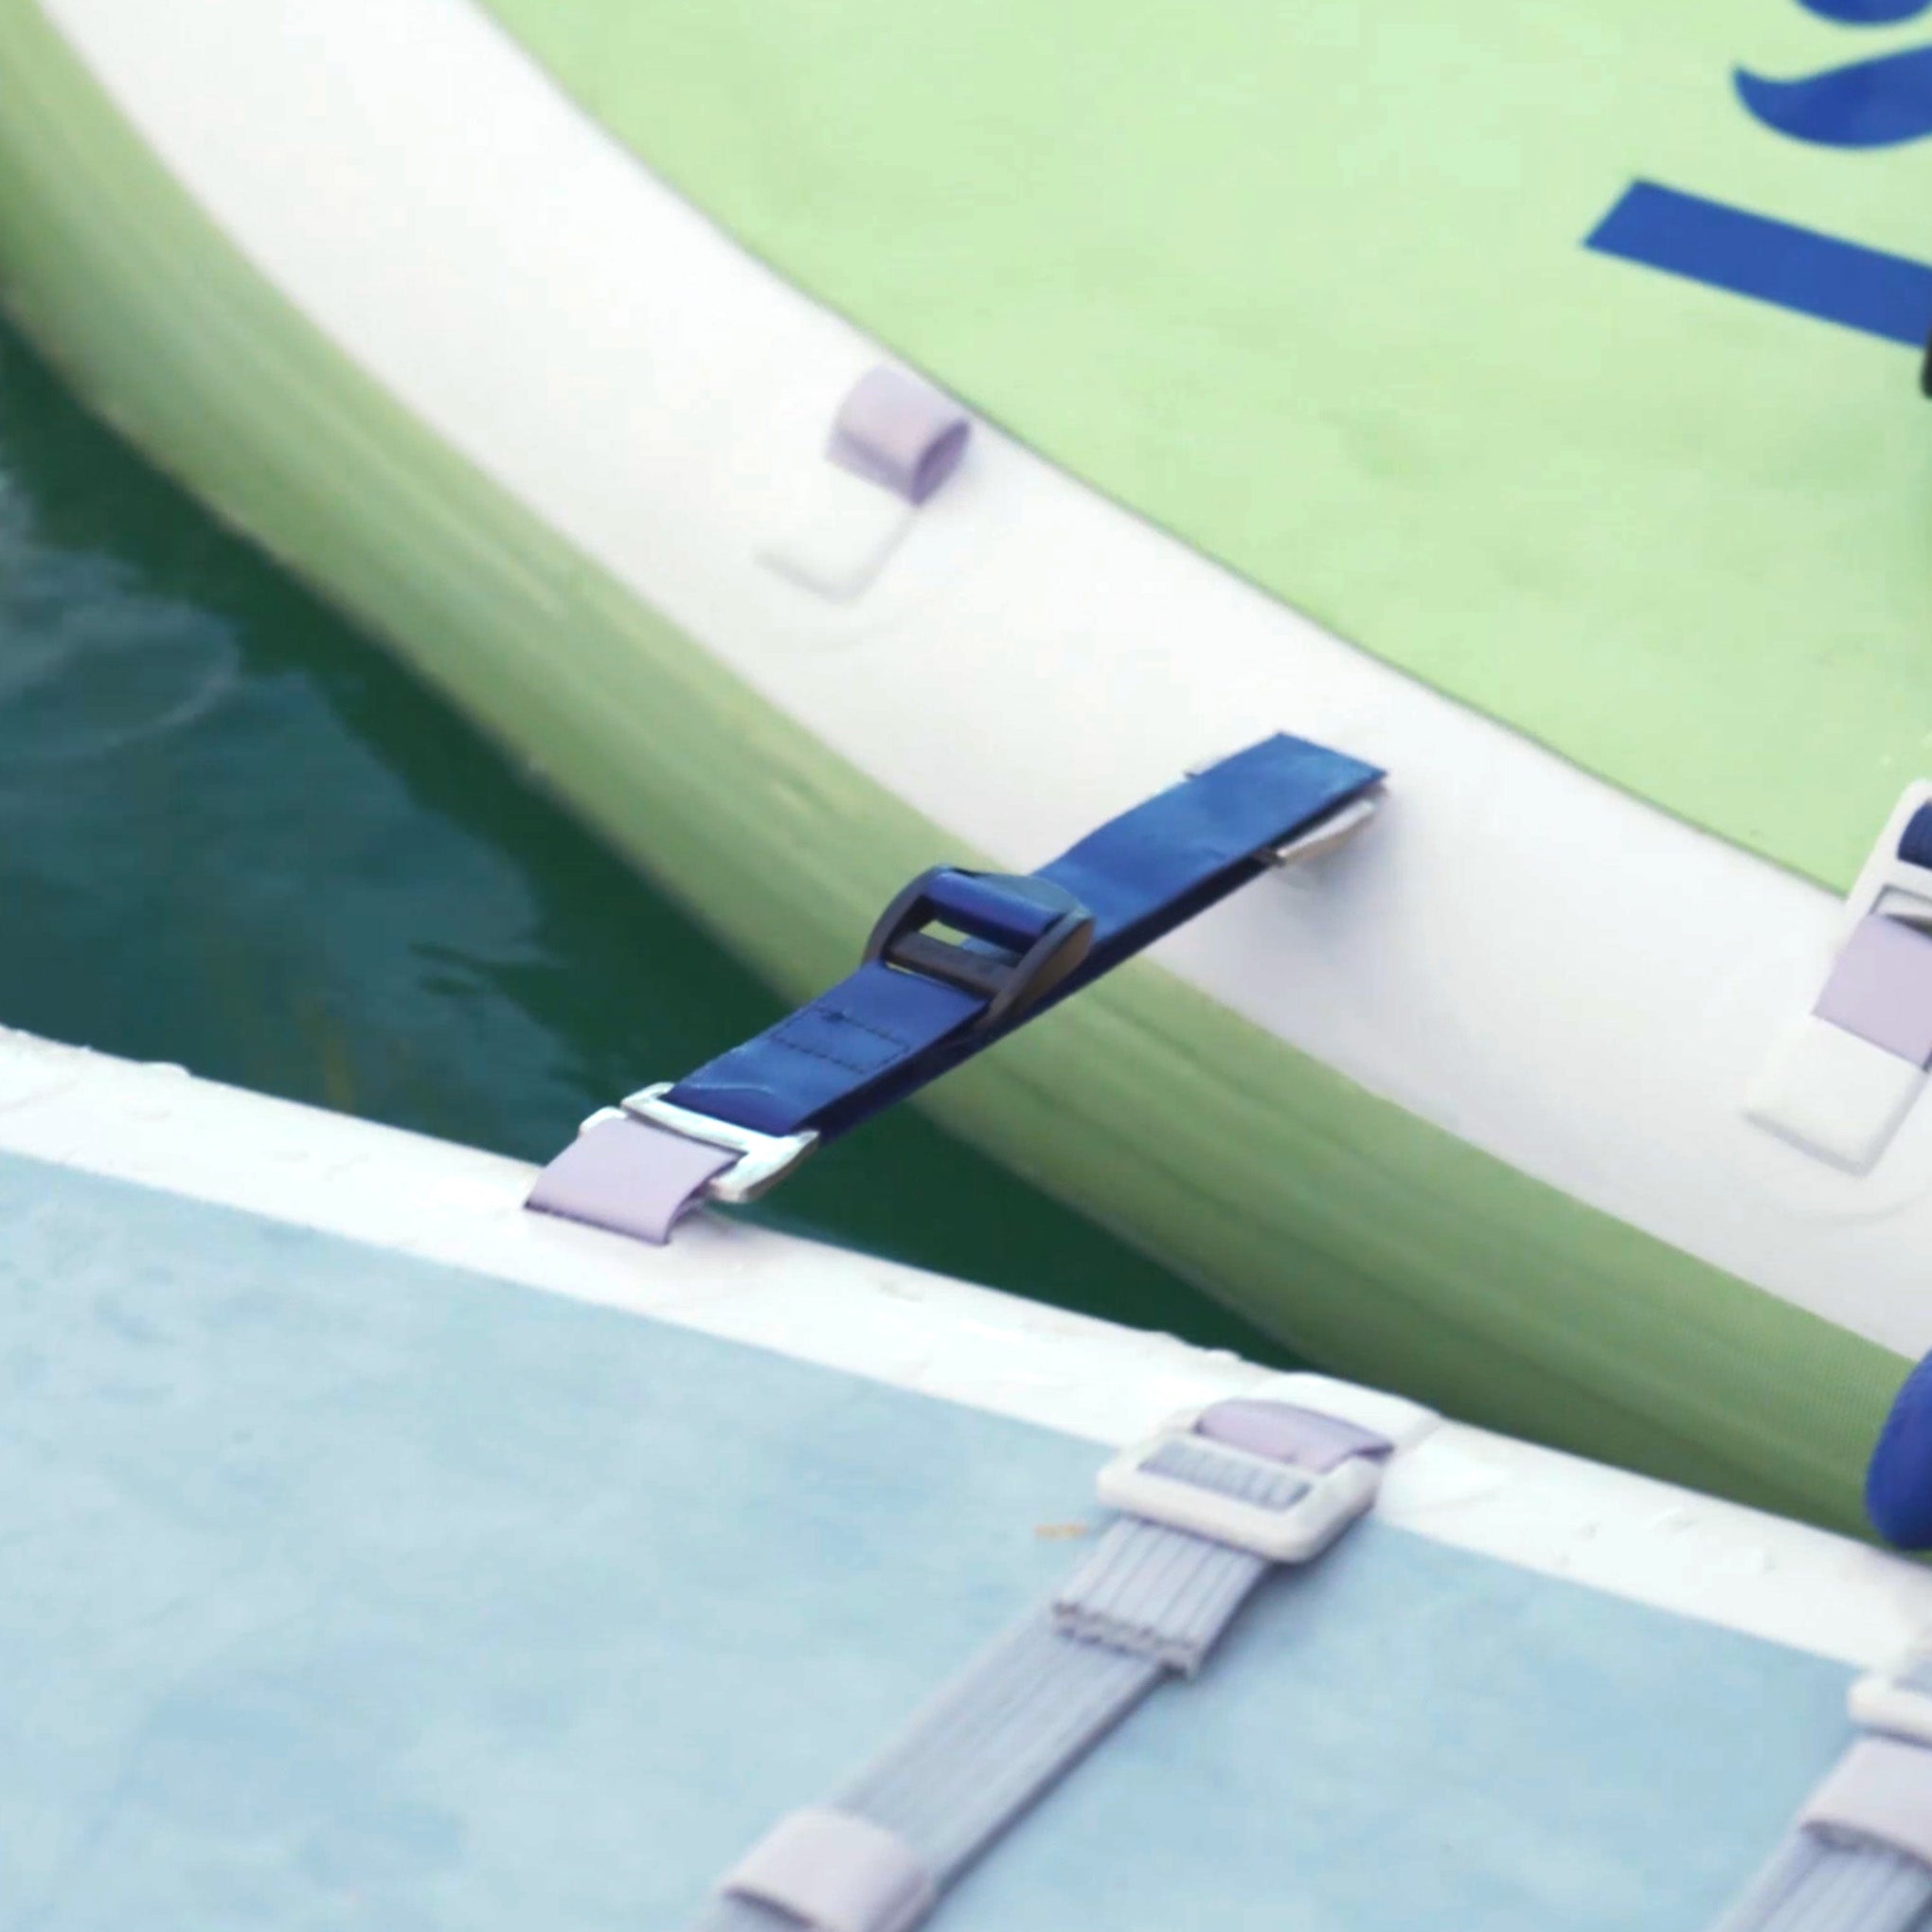 LINKUP Board Connector Straps Connecting Two Paddle Boards Together